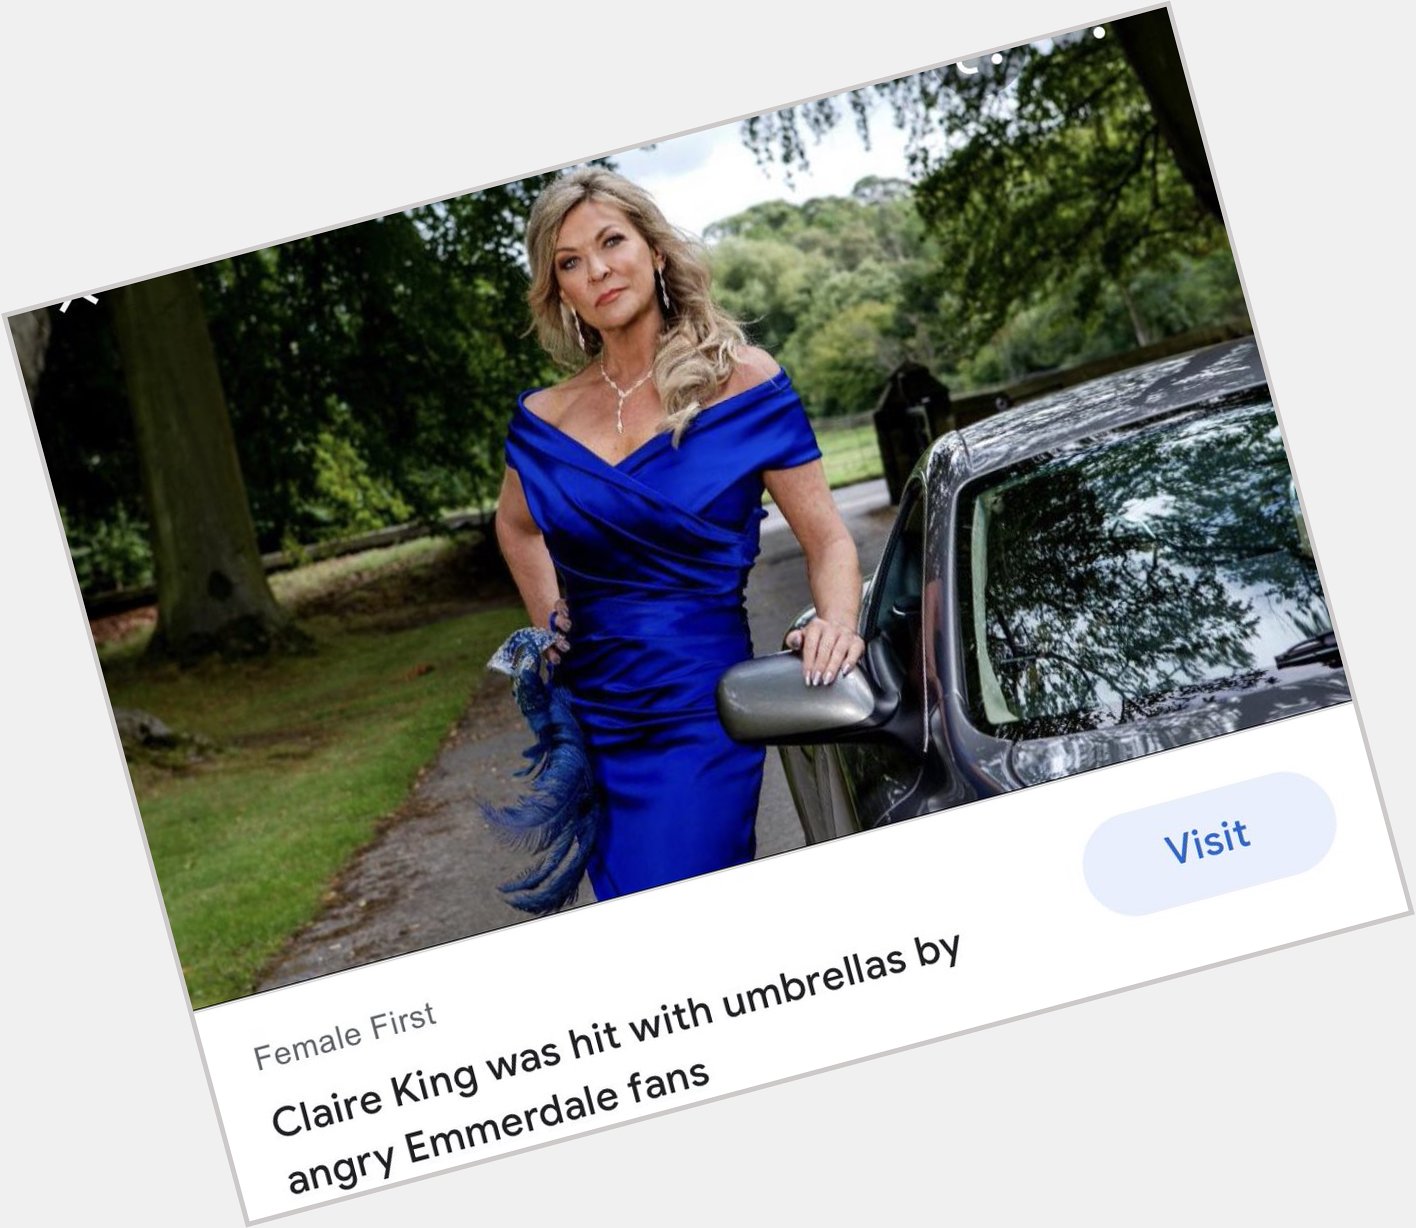 Happy Birthday to Claire King! (I had no choice but to include the headline) 